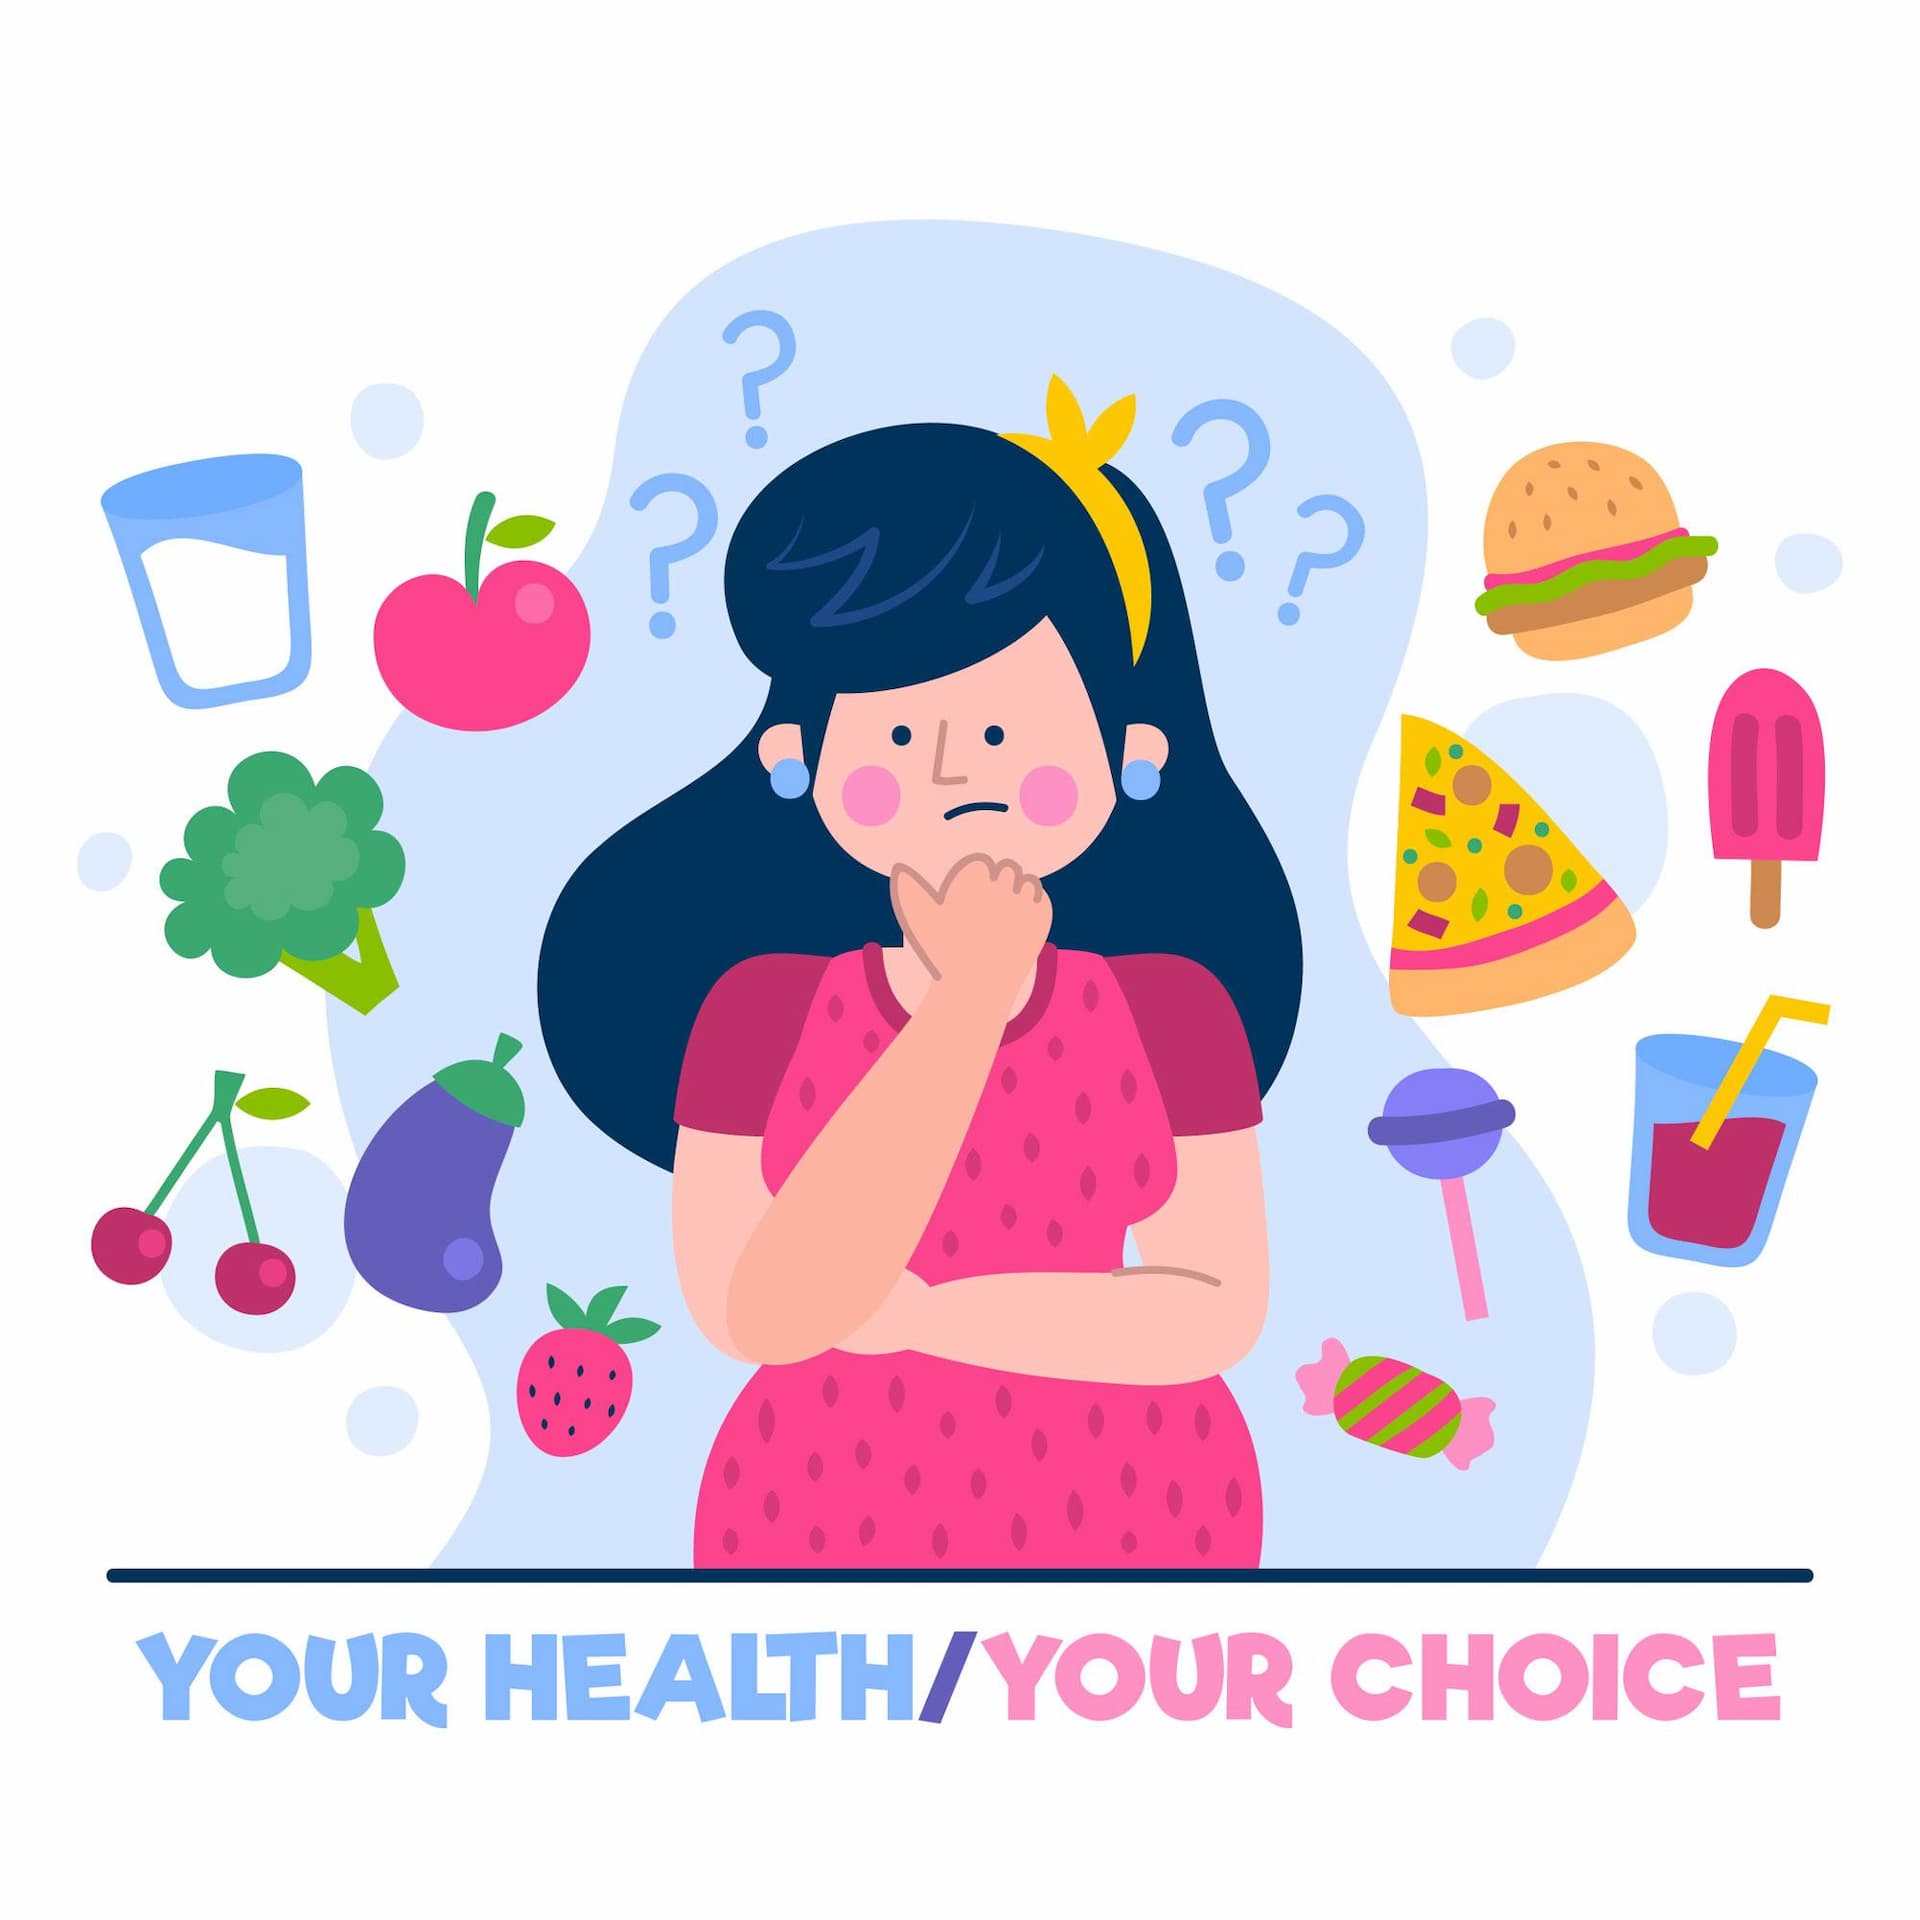 How does your eating habits affect Your Health?